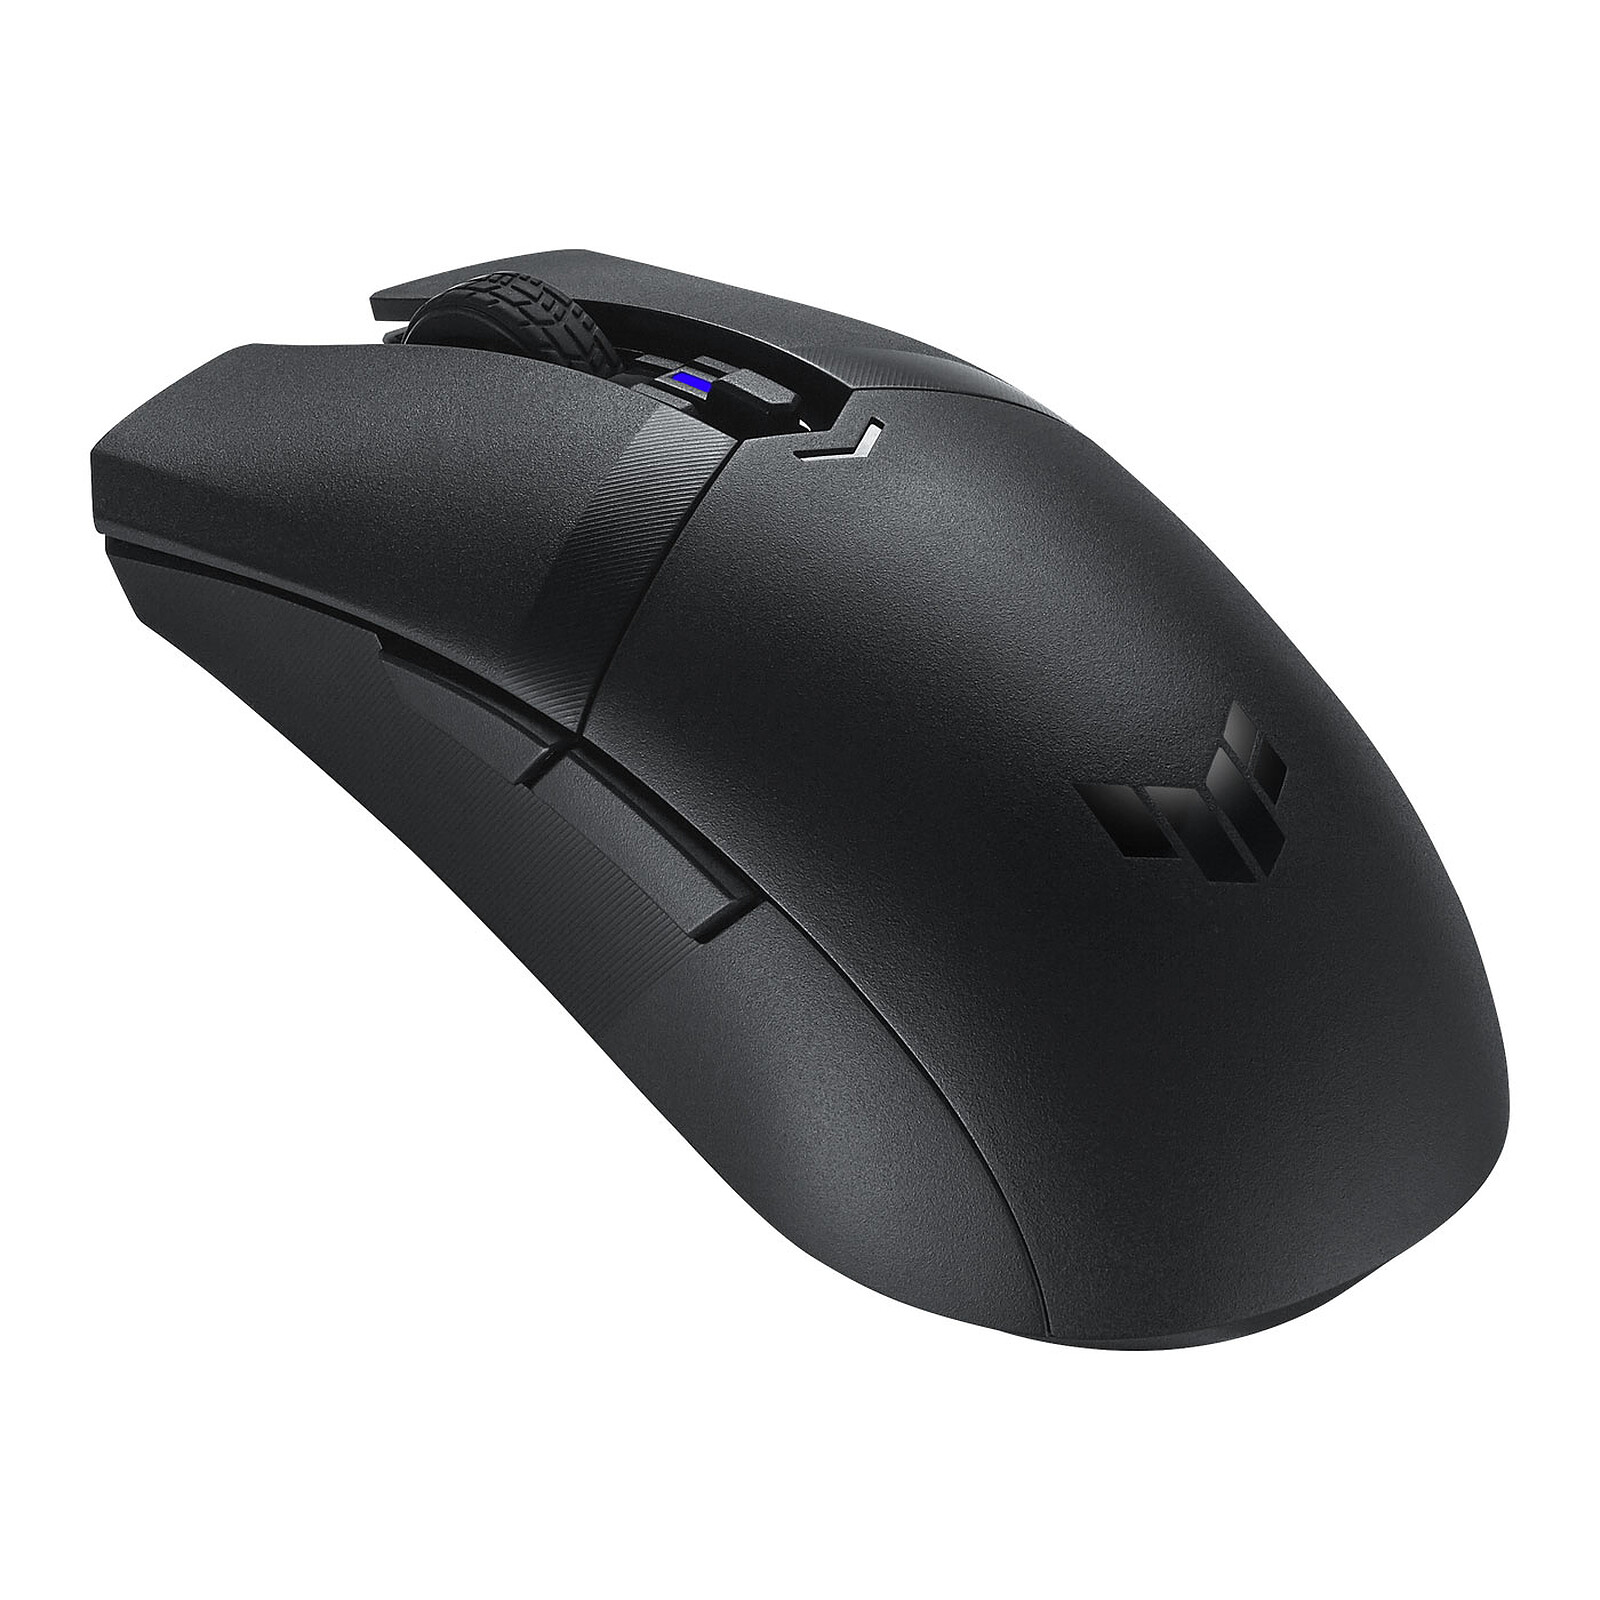 vacancy Properly boss ASUS TUF Gaming M4 Wireless - Mouse ASUS on LDLC